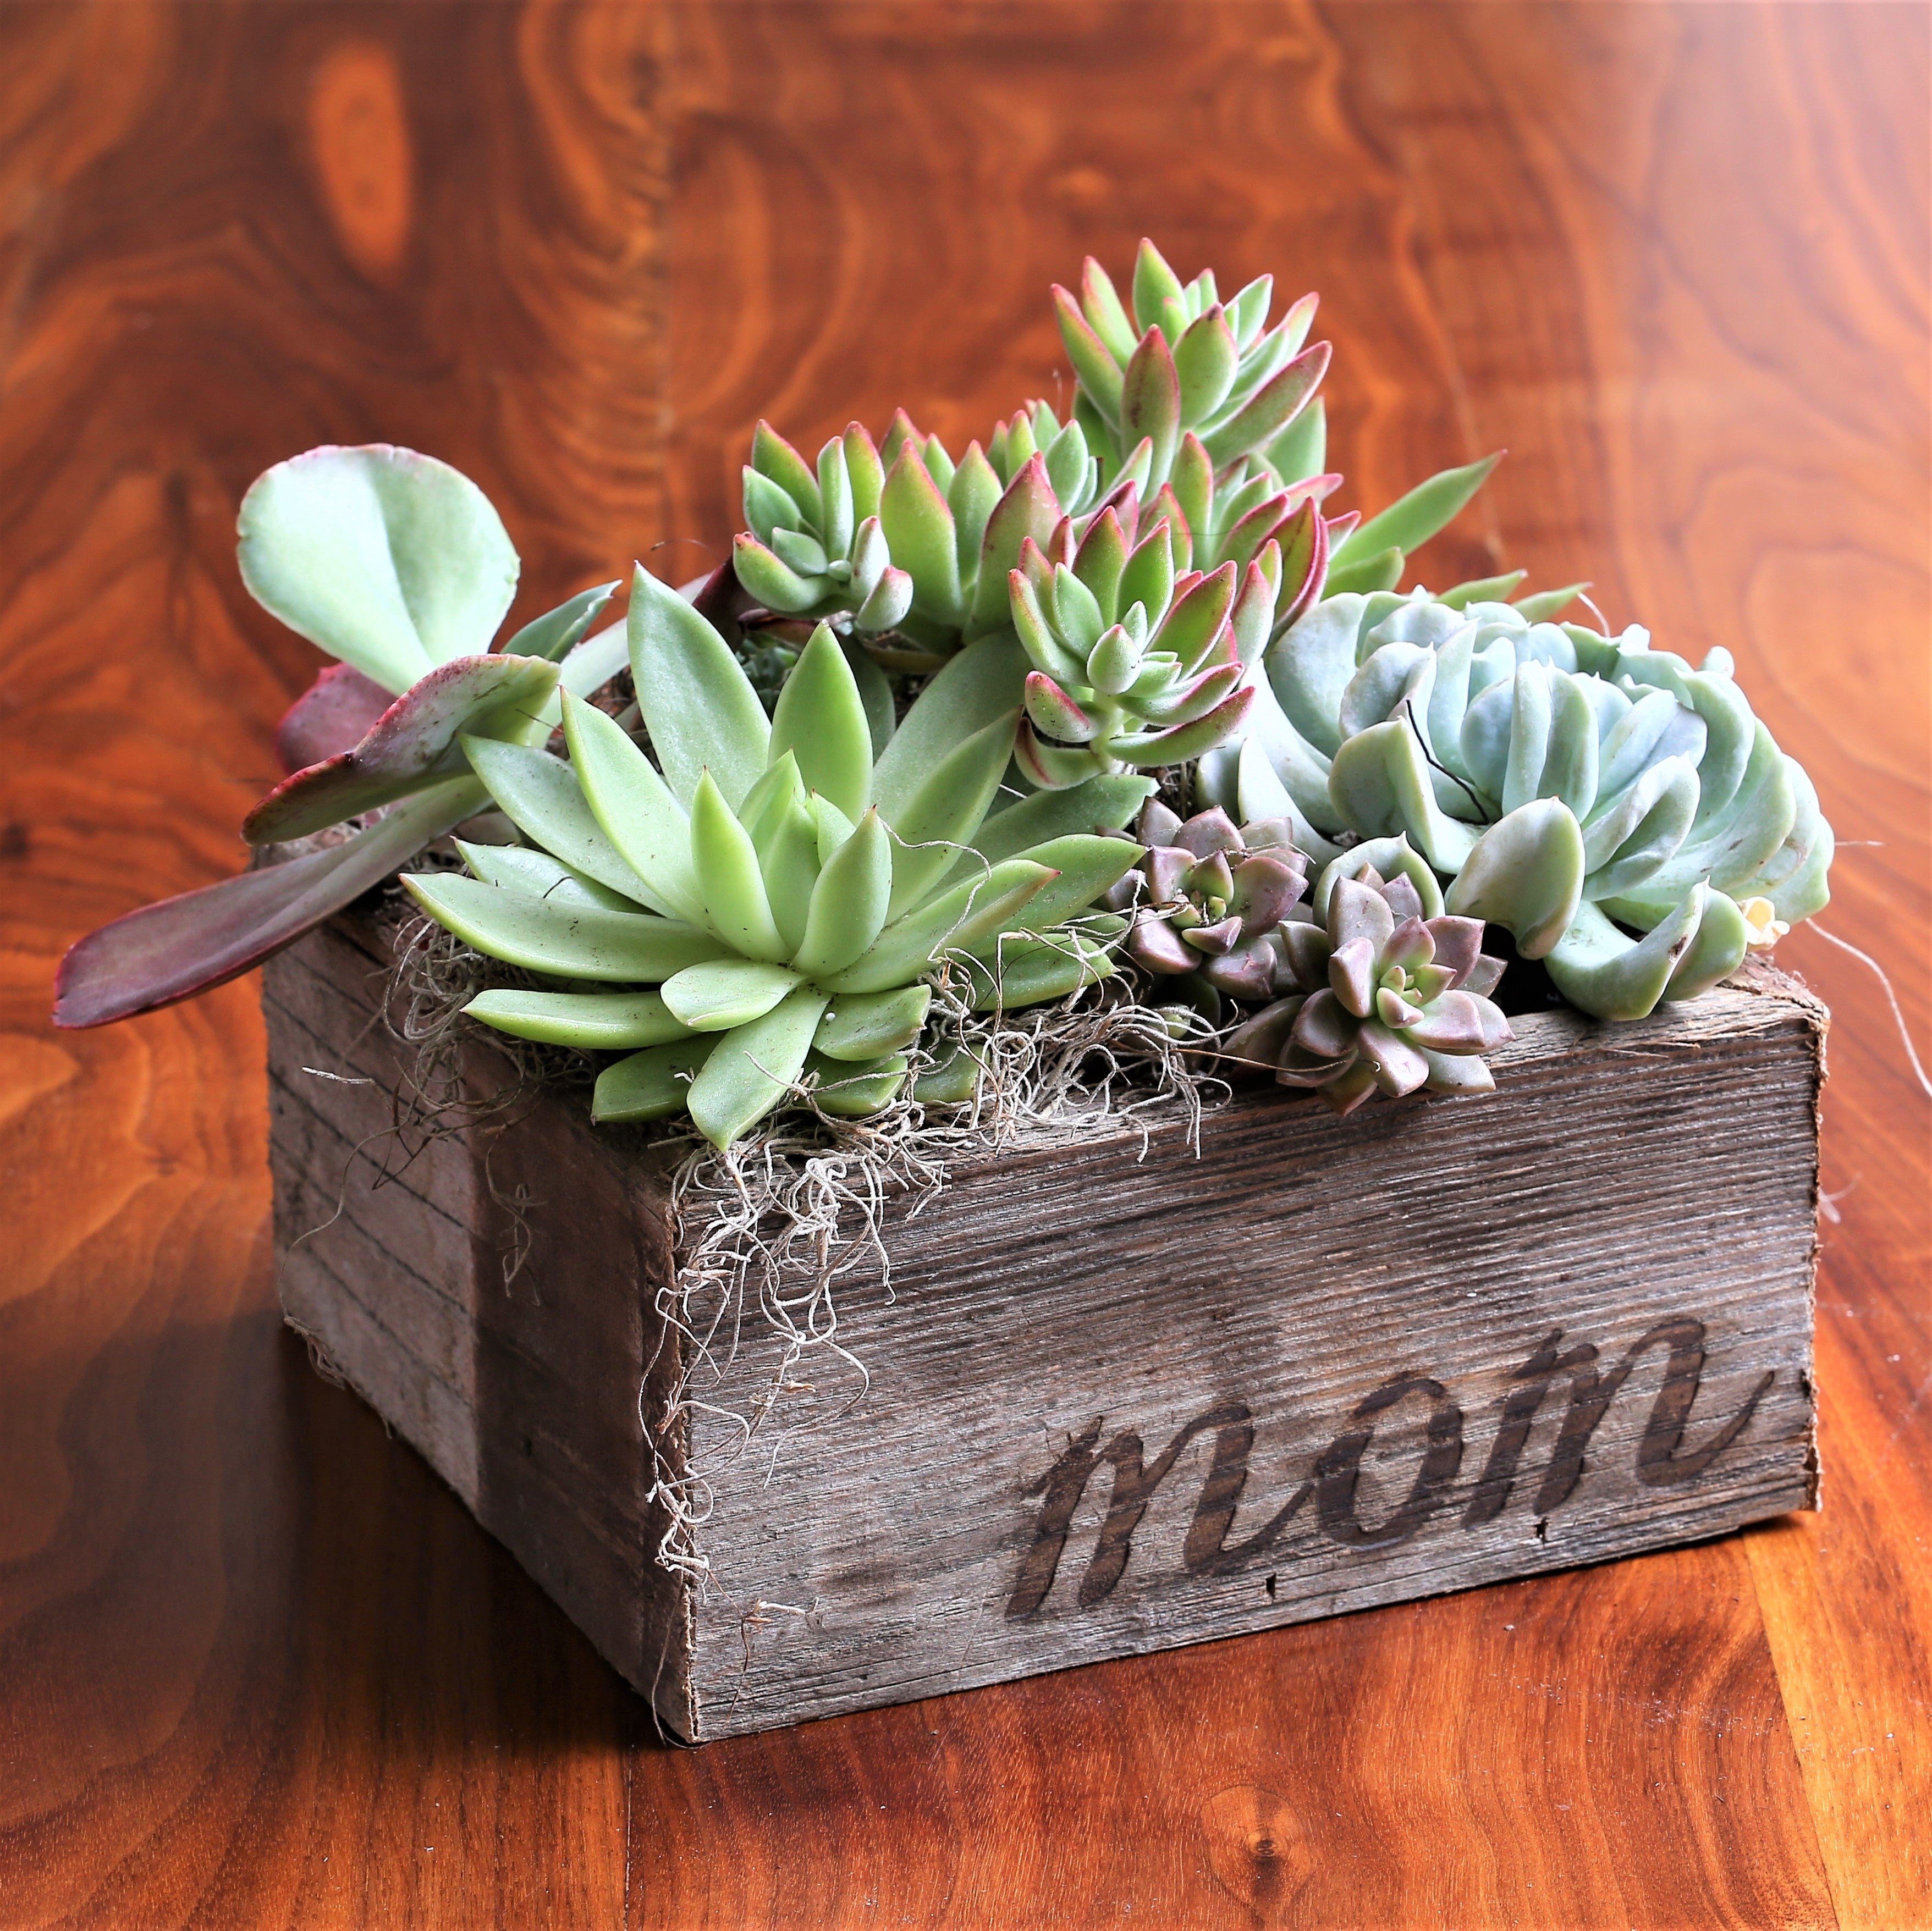 Reclaimed Wood Planter - Small Wooden Stool Reclaimed Wood Plant Stand ...